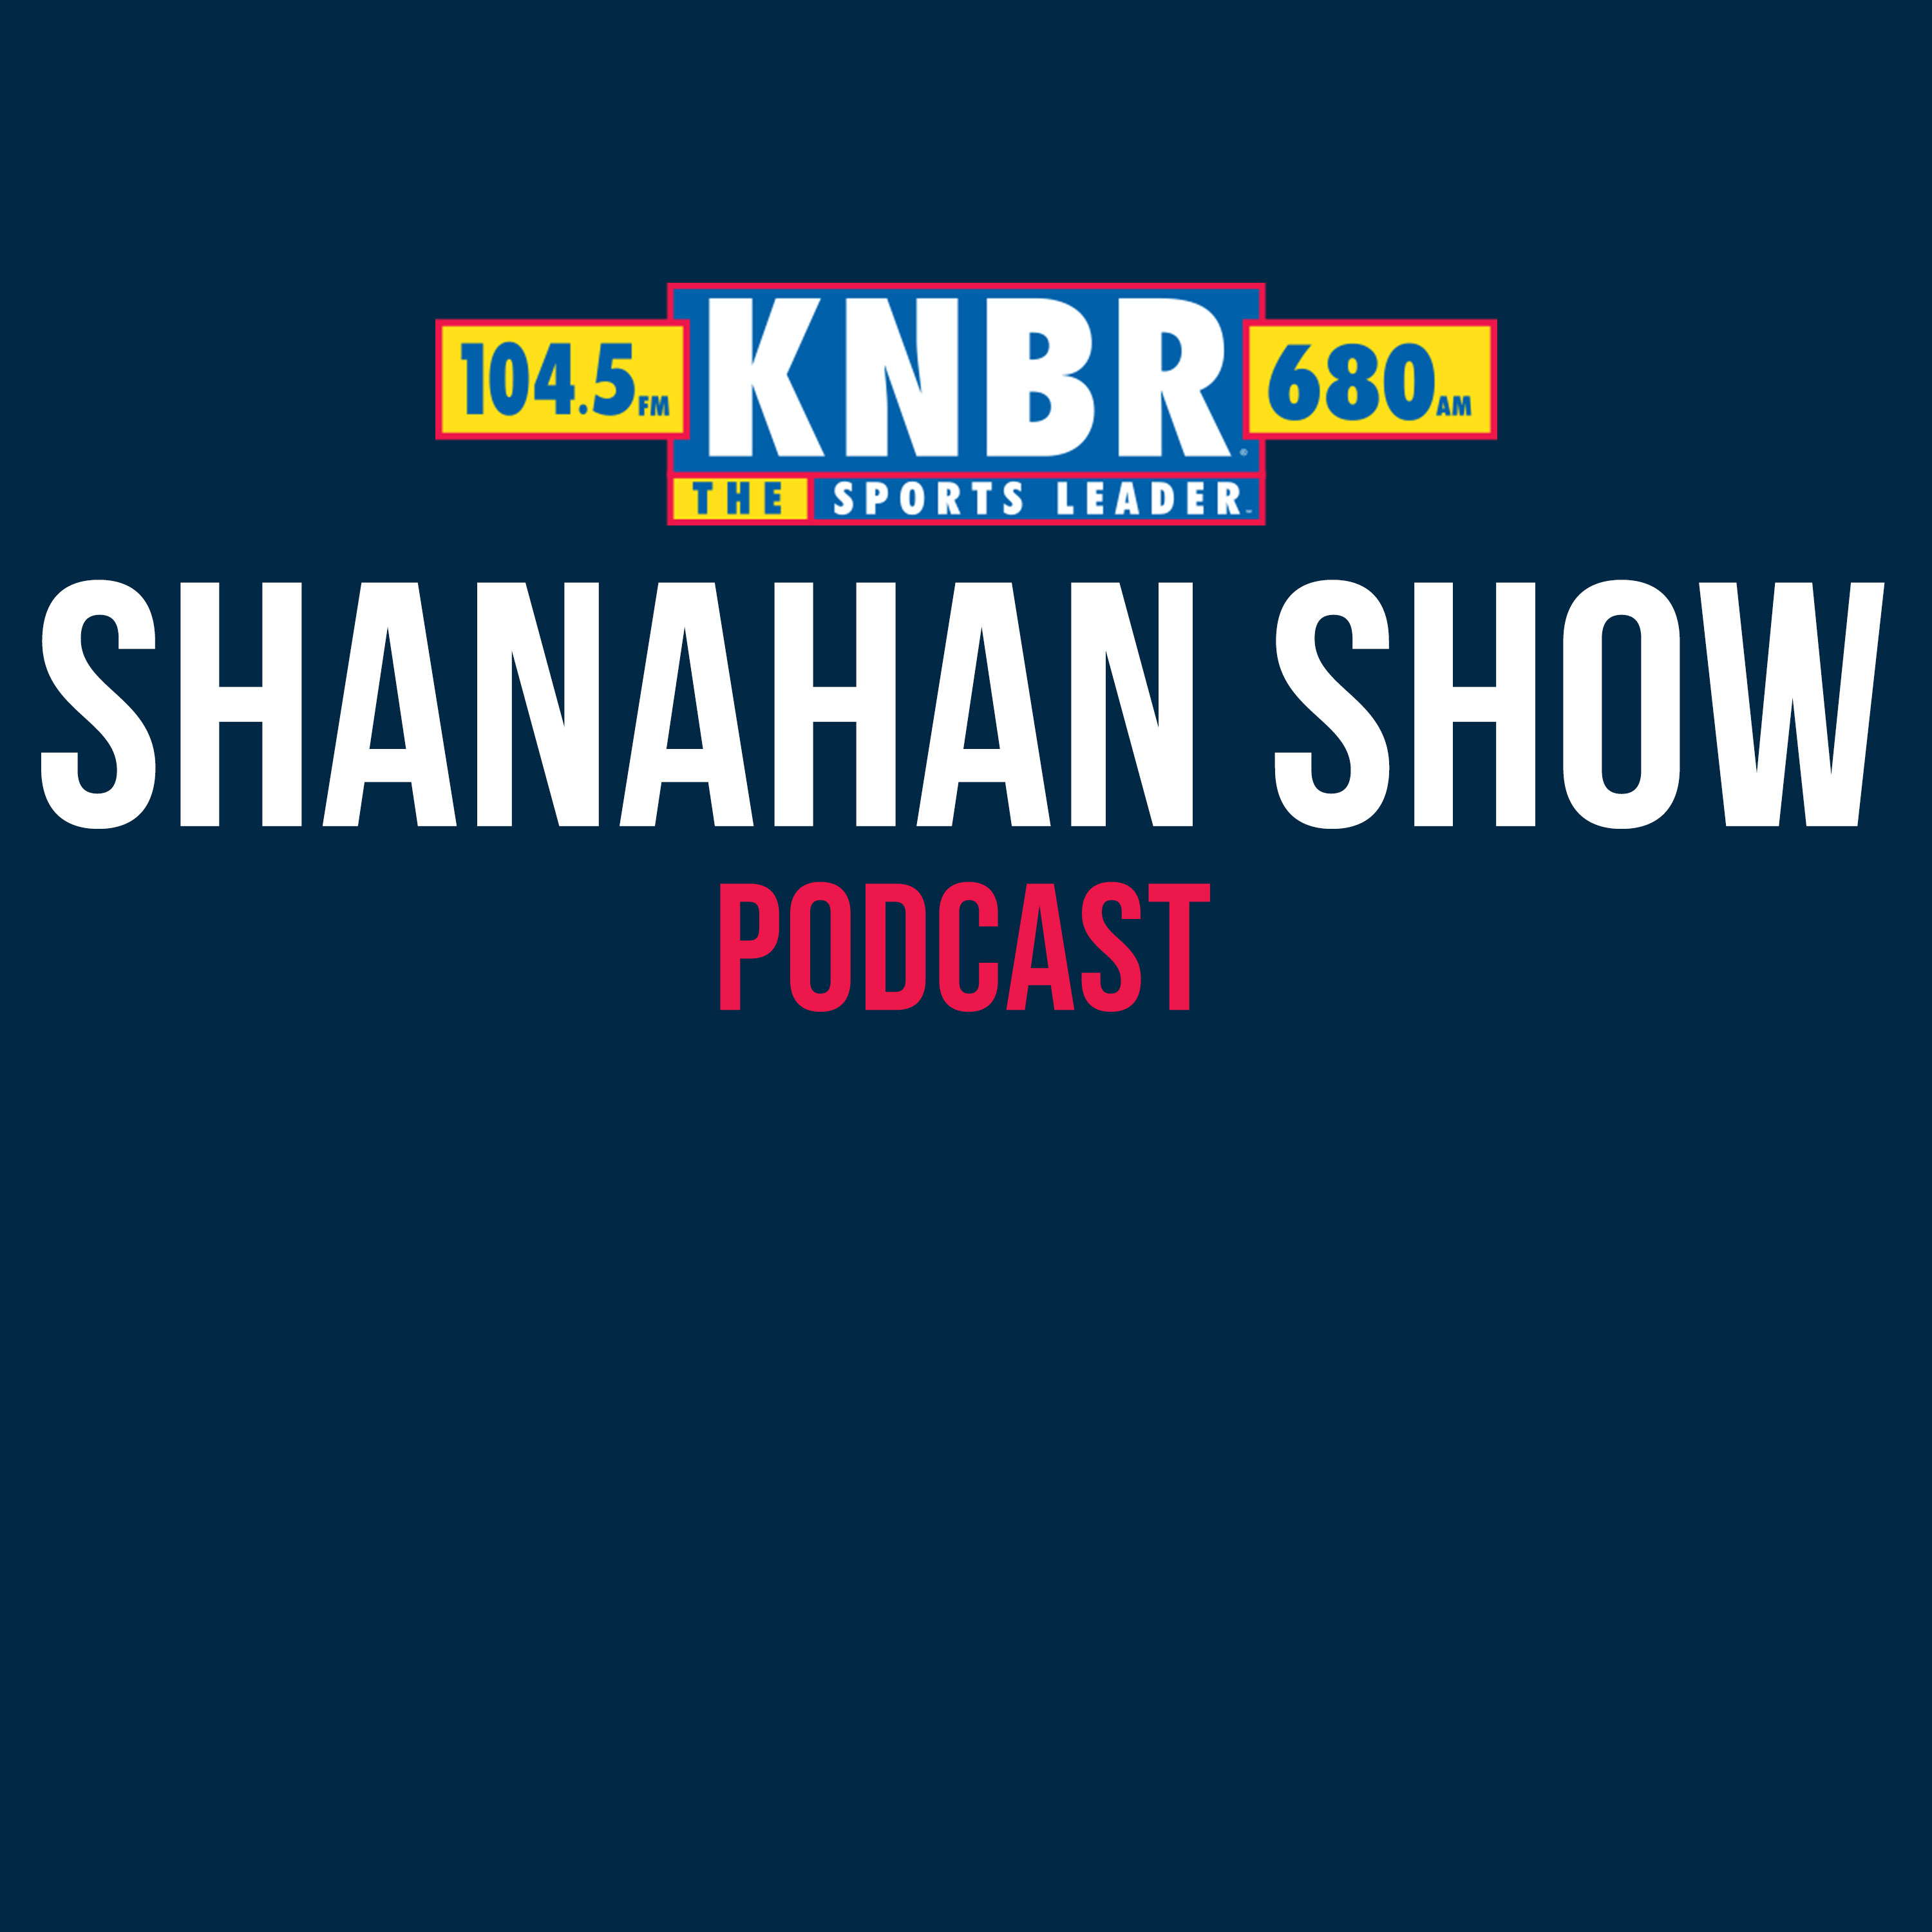 11-16 Kyle Shanahan joins Tolbert & Copes to discuss the 49ers dominant win & if he fined himself for being on the field during a play?